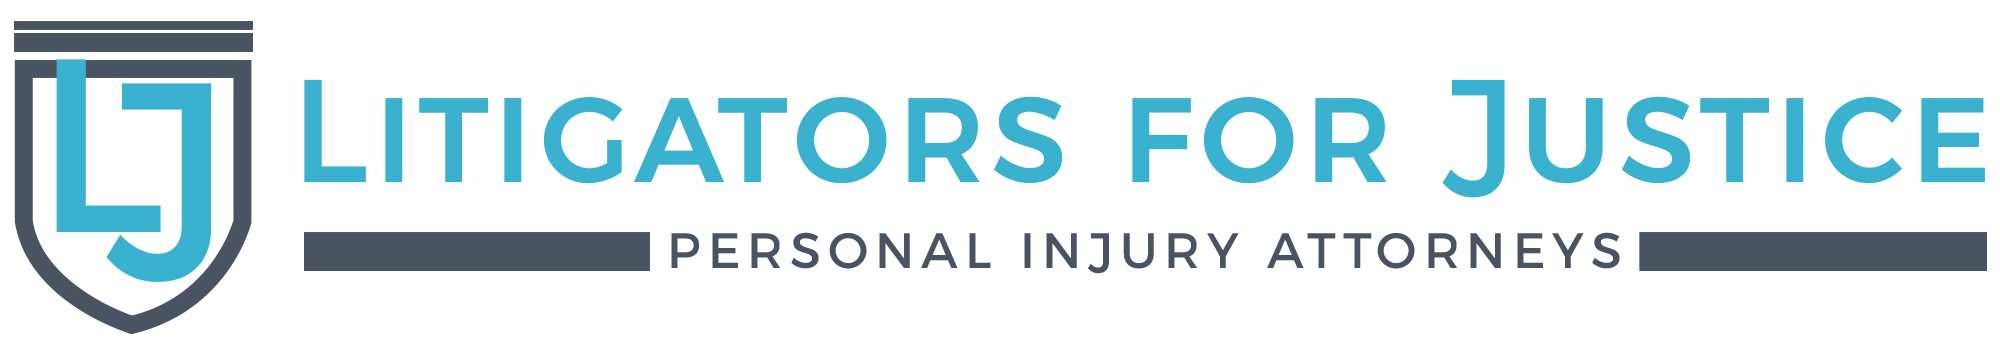 Litigators-for-Justice-Personal-Injury-Attorneys-Logo-1.png